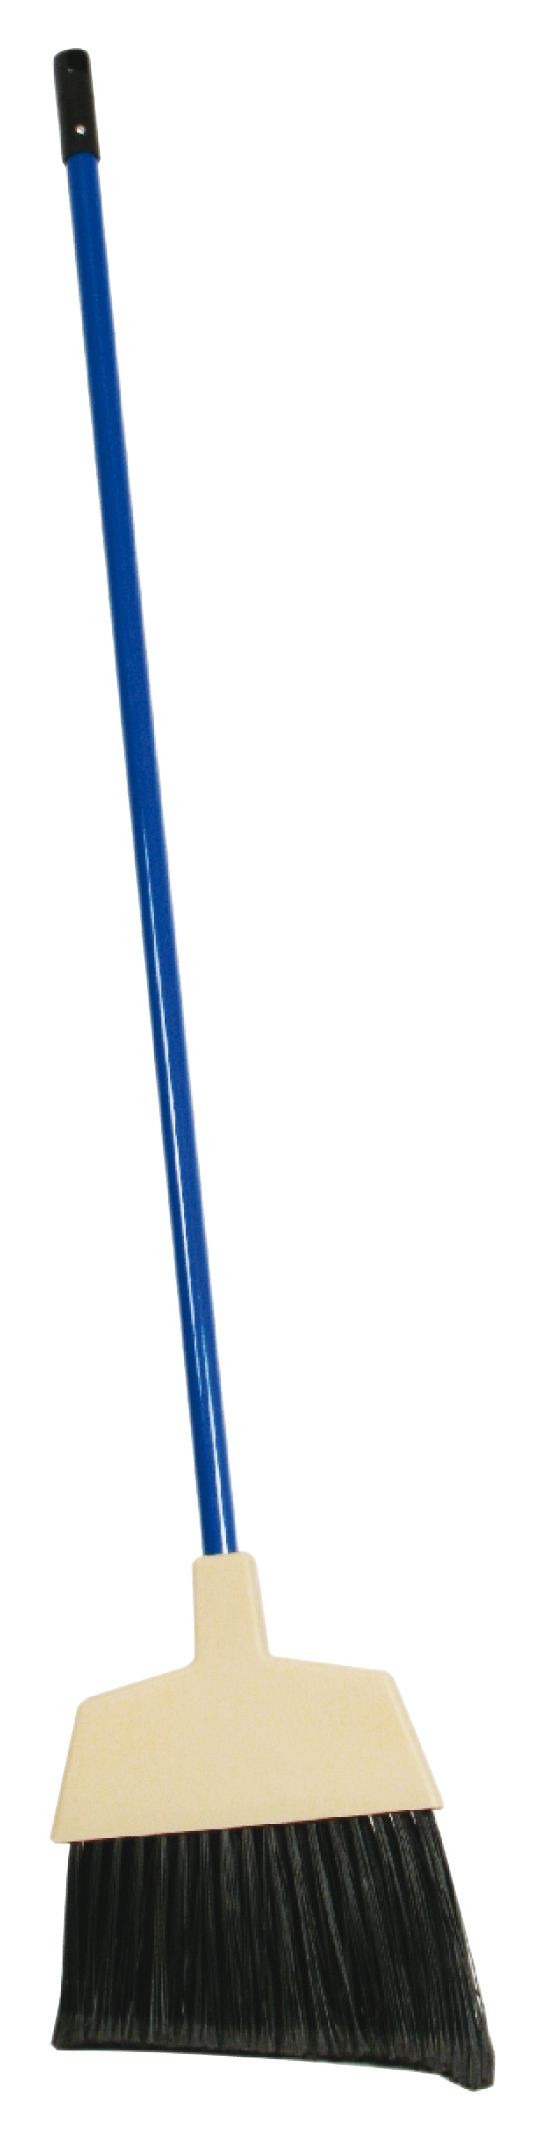 Winco BRM-60L Lobby Broom with Blue Plastic Handle 60"